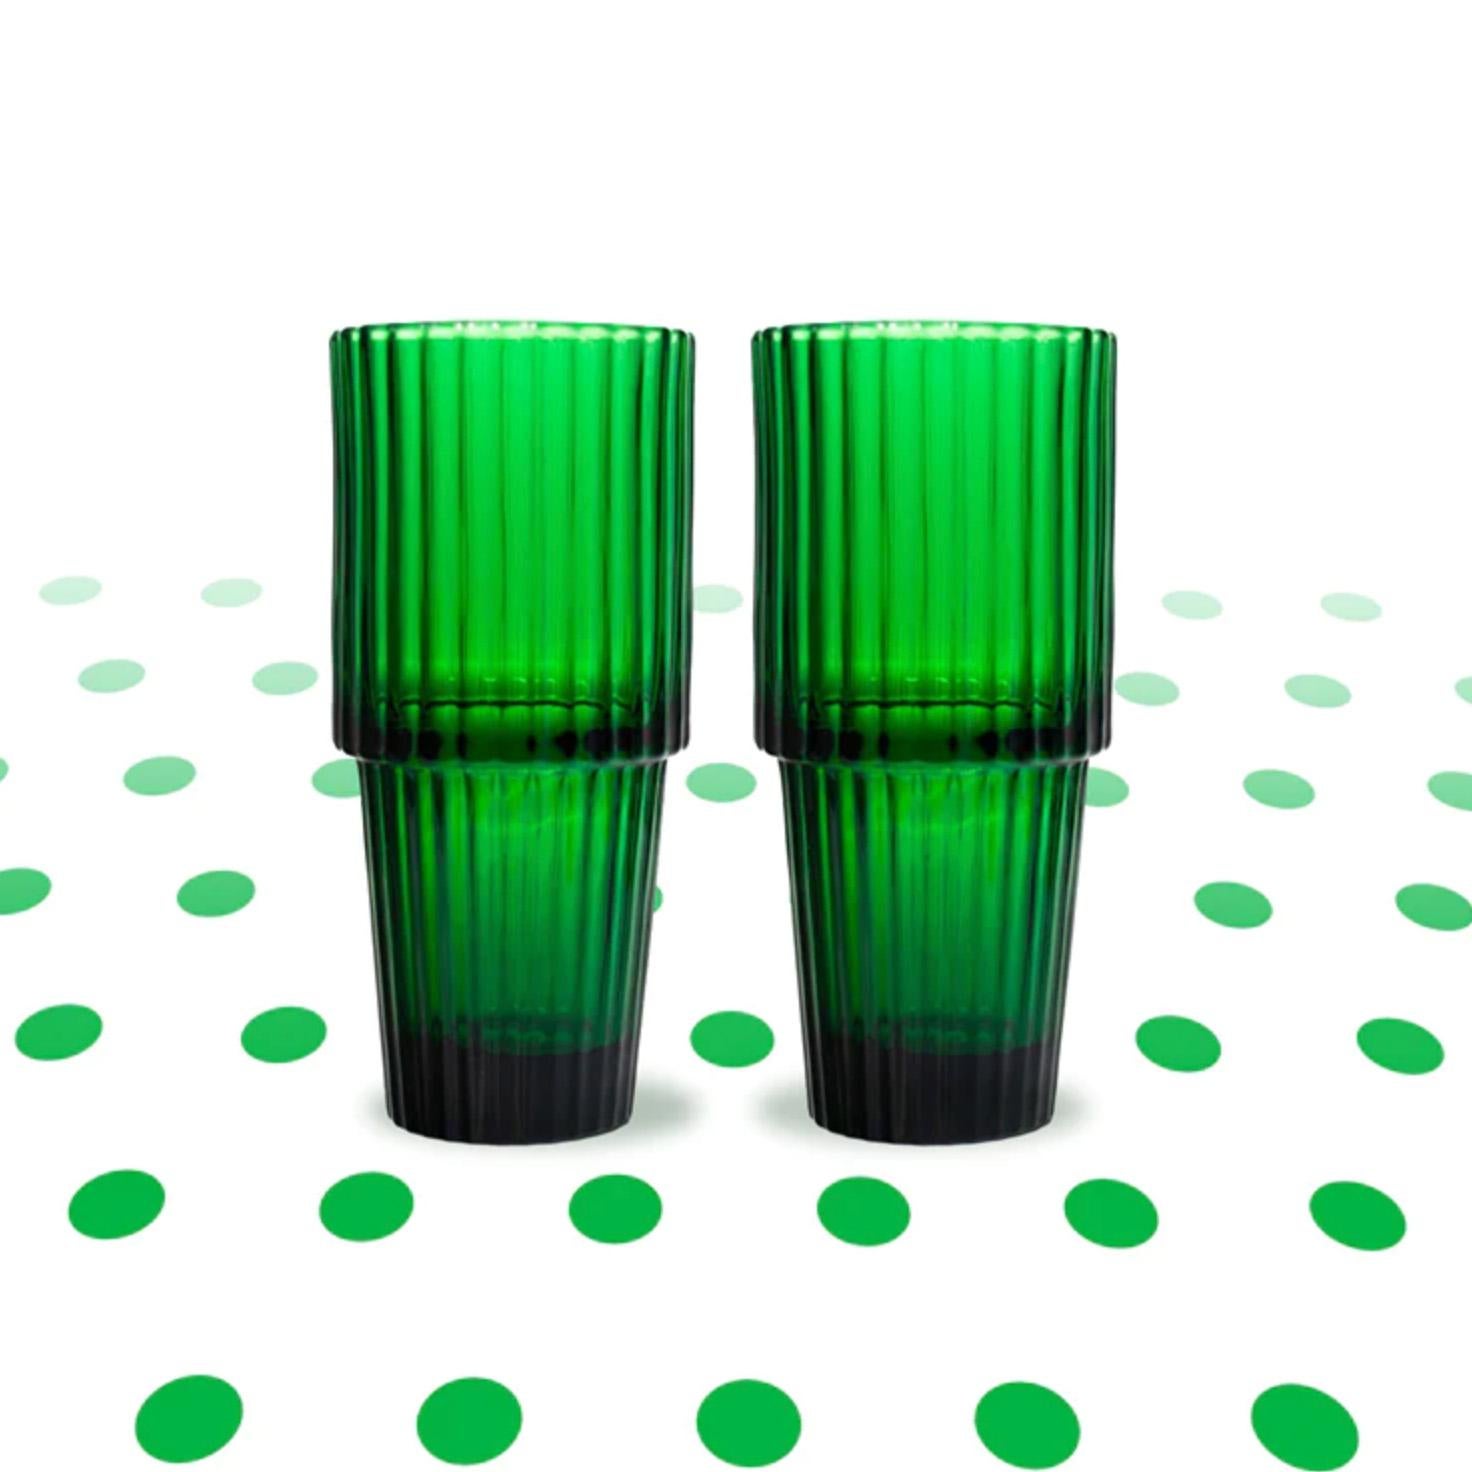 Green tapered glass by DOIY

Made in Europe
Textured glass
Measures: 2.5 x 5.75 in / each

A set of 2 ribbed tall glasses that will add a timeless style to your homeware collection. 



All sales are final.
 